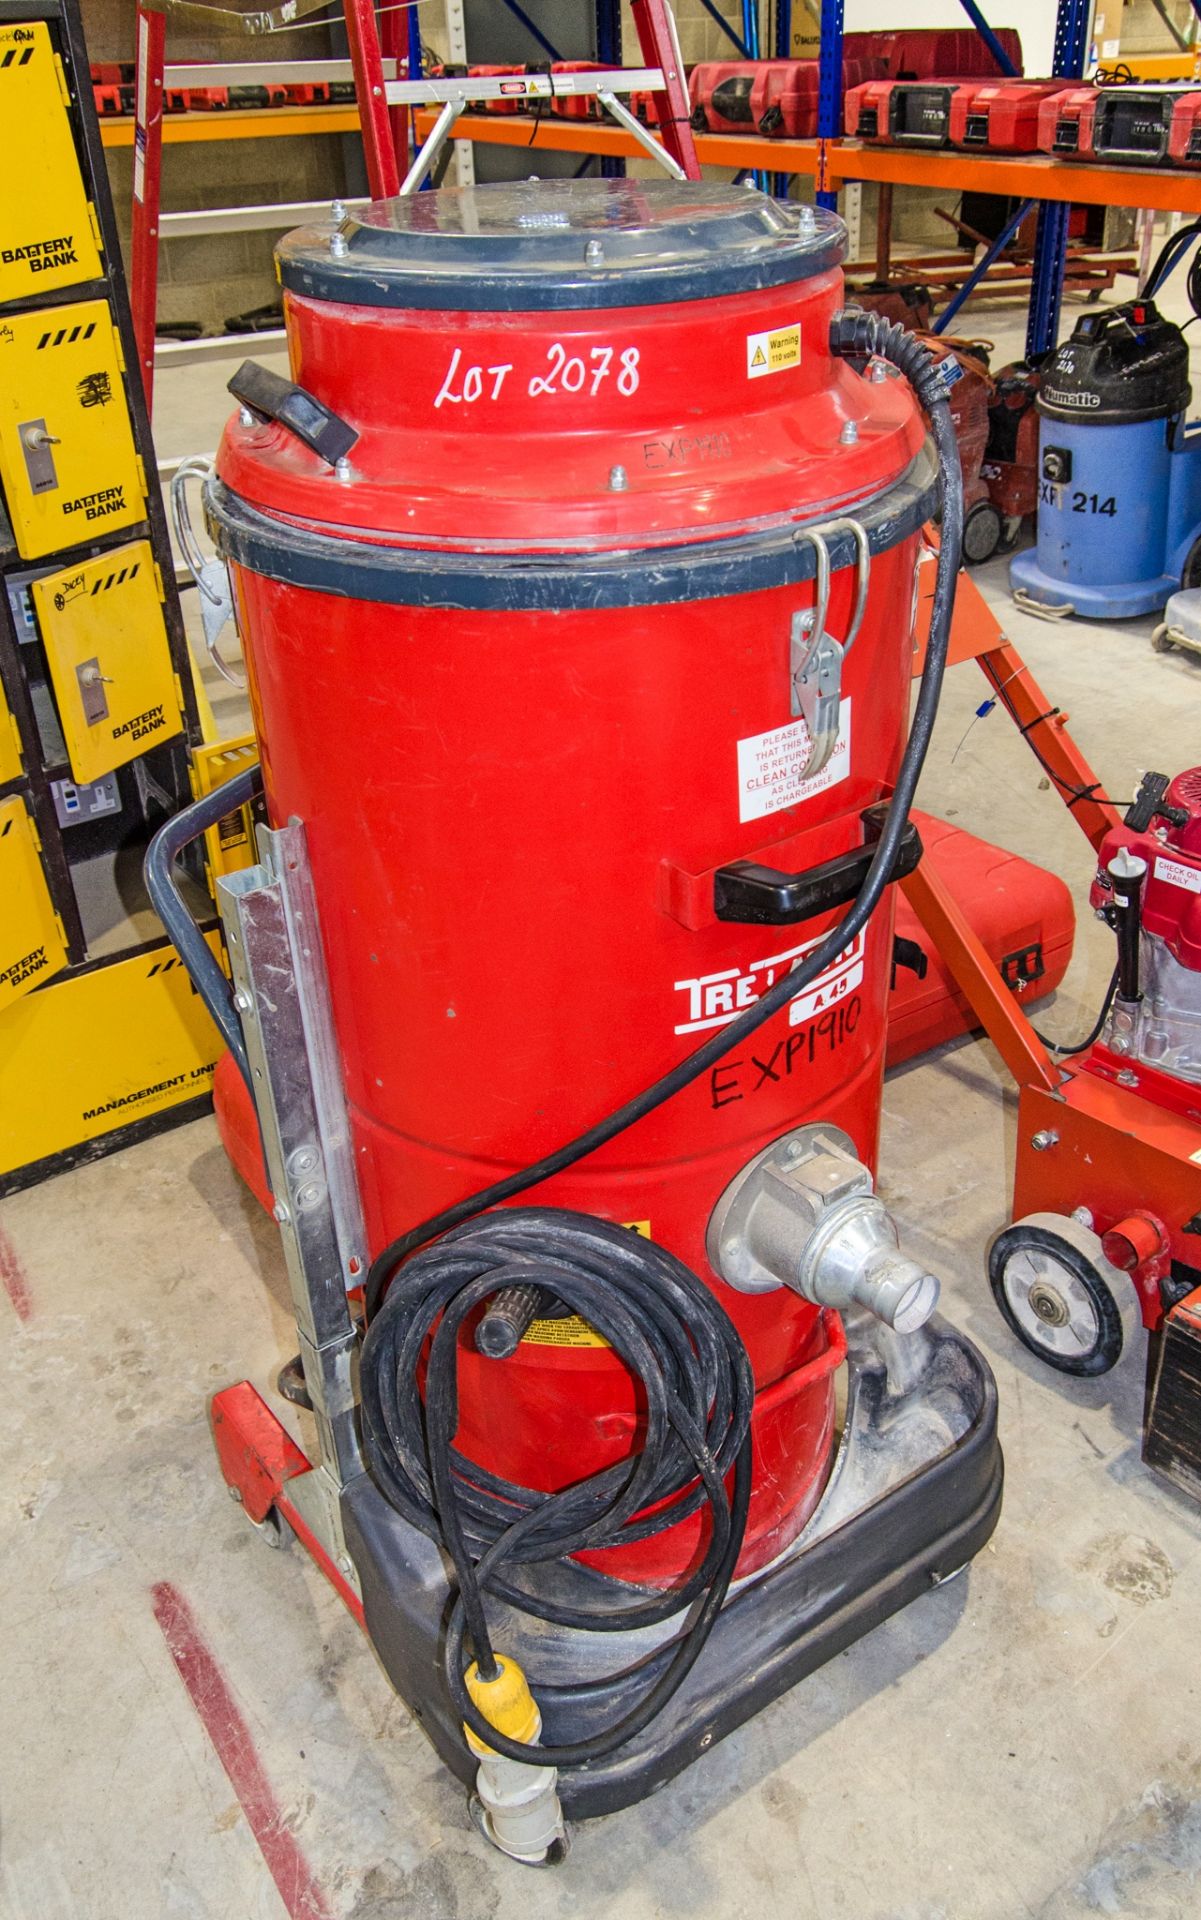 Trelawny A45 110v industrial vacuum cleaner EXP1910